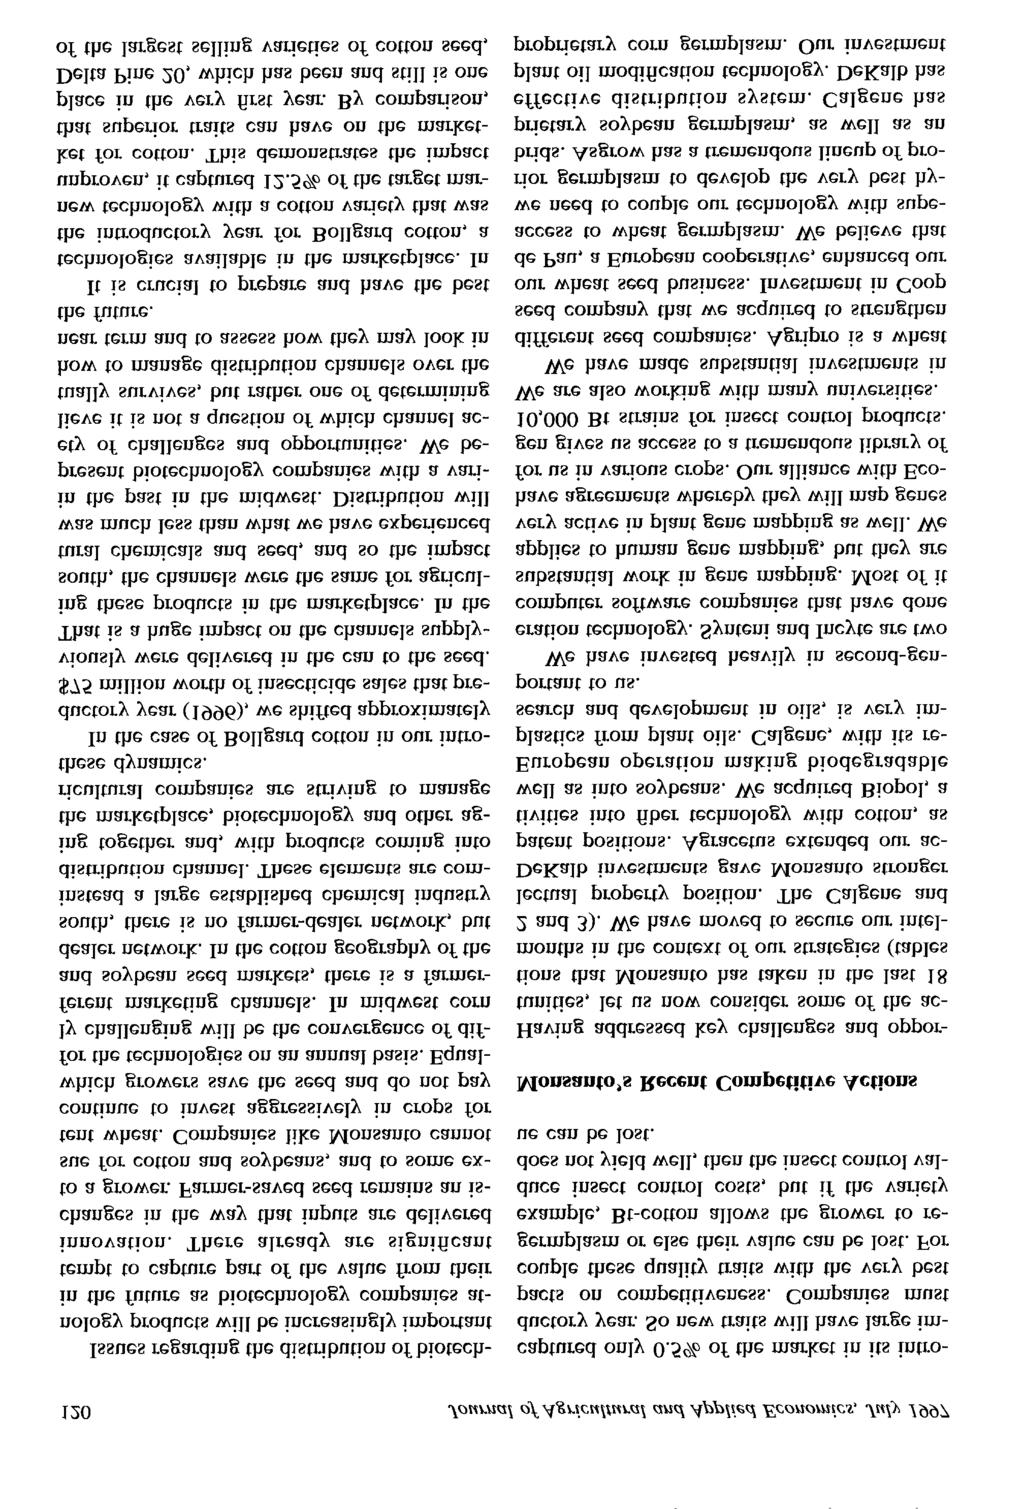 120 Journal of Agricultural and Applied Economics, July 1997 Issues regarding the distribution of biotechnology products will be increasingly important in the future as biotechnology companies